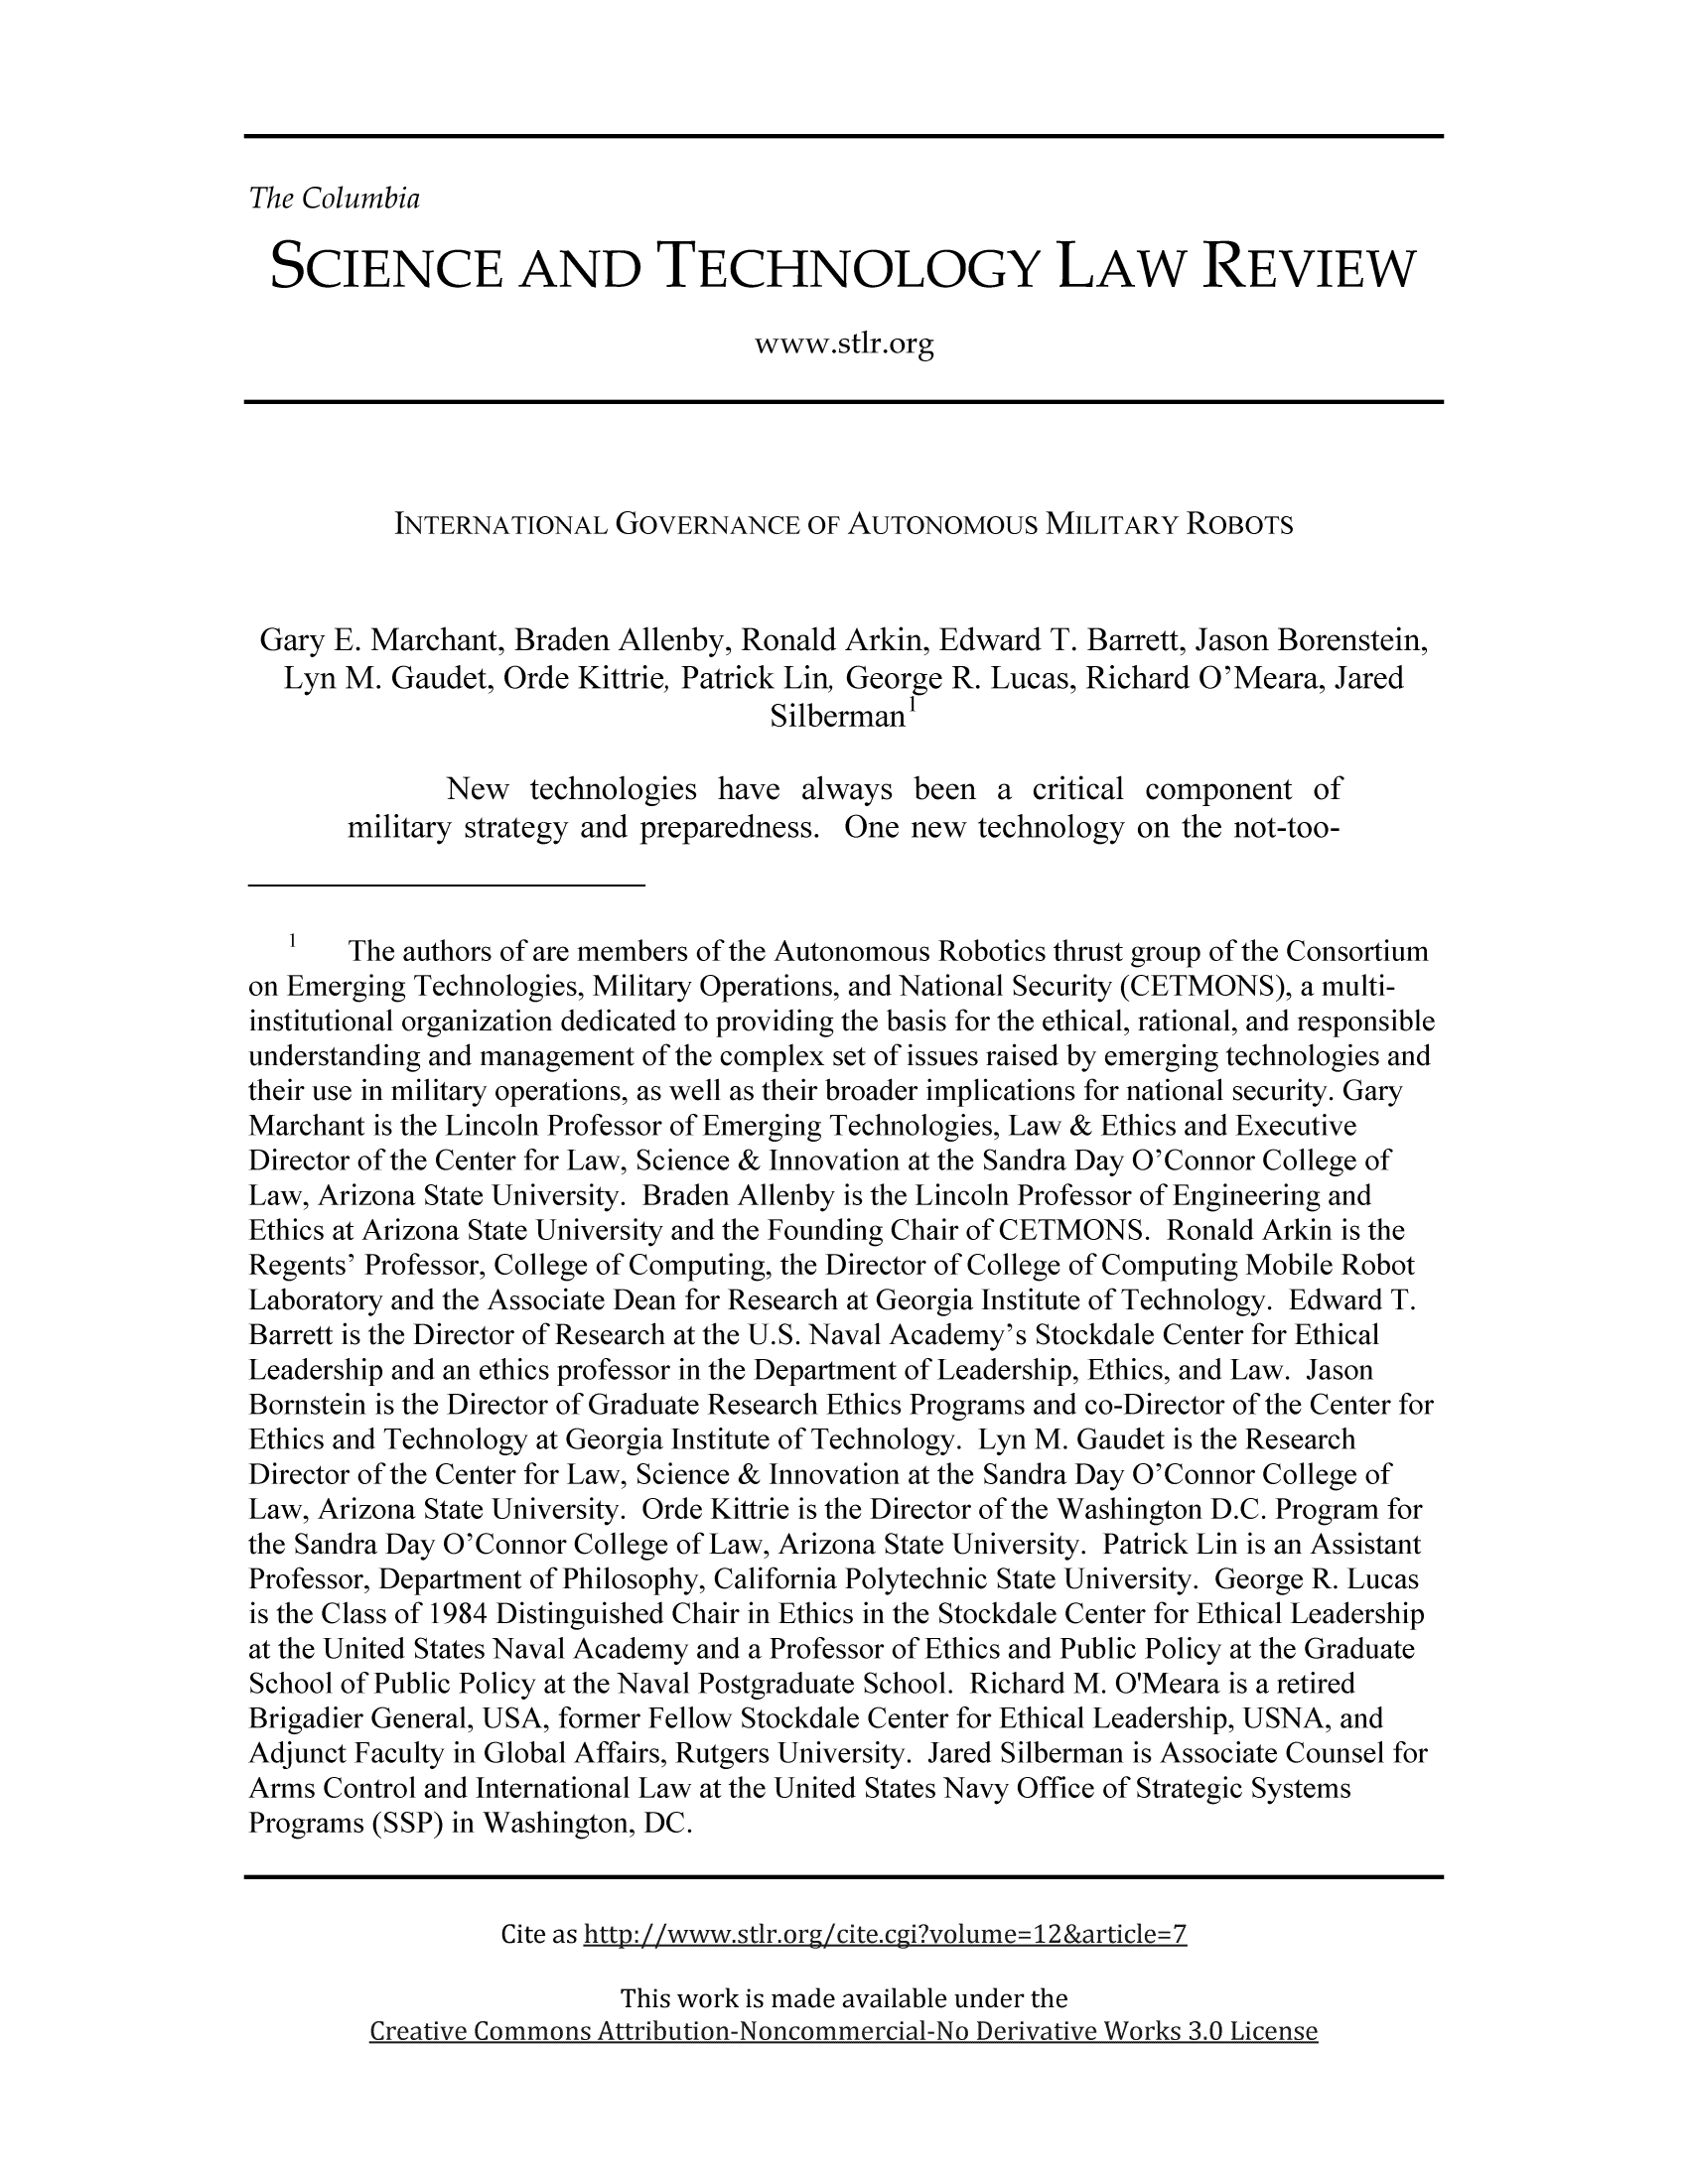 handle is hein.journals/cstlr12 and id is 272 raw text is: The Columbia

SCIENCE AND TECHNOLOGY LAW REVIEW
www.stlr.org
INTERNATIONAL GOVERNANCE OF AUTONOMOUS MILITARY ROBOTS
Gary E. Marchant, Braden Allenby, Ronald Arkin, Edward T. Barrett, Jason Borenstein,
Lyn M. Gaudet, Orde Kittrie, Patrick Lin, George R. Lucas, Richard O'Meara, Jared
Silberman'
New technologies have always been a critical component of
military strategy and preparedness. One new technology on the not-too-
1 The authors of are members of the Autonomous Robotics thrust group of the Consortium
on Emerging Technologies, Military Operations, and National Security (CETMONS), a multi-
institutional organization dedicated to providing the basis for the ethical, rational, and responsible
understanding and management of the complex set of issues raised by emerging technologies and
their use in military operations, as well as their broader implications for national security. Gary
Marchant is the Lincoln Professor of Emerging Technologies, Law & Ethics and Executive
Director of the Center for Law, Science & Innovation at the Sandra Day O'Connor College of
Law, Arizona State University. Braden Allenby is the Lincoln Professor of Engineering and
Ethics at Arizona State University and the Founding Chair of CETMONS. Ronald Arkin is the
Regents' Professor, College of Computing, the Director of College of Computing Mobile Robot
Laboratory and the Associate Dean for Research at Georgia Institute of Technology. Edward T.
Barrett is the Director of Research at the U.S. Naval Academy's Stockdale Center for Ethical
Leadership and an ethics professor in the Department of Leadership, Ethics, and Law. Jason
Bornstein is the Director of Graduate Research Ethics Programs and co-Director of the Center for
Ethics and Technology at Georgia Institute of Technology. Lyn M. Gaudet is the Research
Director of the Center for Law, Science & Innovation at the Sandra Day O'Connor College of
Law, Arizona State University. Orde Kittrie is the Director of the Washington D.C. Program for
the Sandra Day O'Connor College of Law, Arizona State University. Patrick Lin is an Assistant
Professor, Department of Philosophy, California Polytechnic State University. George R. Lucas
is the Class of 1984 Distinguished Chair in Ethics in the Stockdale Center for Ethical Leadership
at the United States Naval Academy and a Professor of Ethics and Public Policy at the Graduate
School of Public Policy at the Naval Postgraduate School. Richard M. O'Meara is a retired
Brigadier General, USA, former Fellow Stockdale Center for Ethical Leadership, USNA, and
Adjunct Faculty in Global Affairs, Rutgers University. Jared Silberman is Associate Counsel for
Arms Control and International Law at the United States Navy Office of Strategic Systems
Programs (SSP) in Washington, DC.
Cite as htto:I//www vstir org/cite.cgi2volume= 12 &article= 7

This work is made available under the
Creative Commons Attribution- N oncommercial-No Derivative Works 3.0 License


